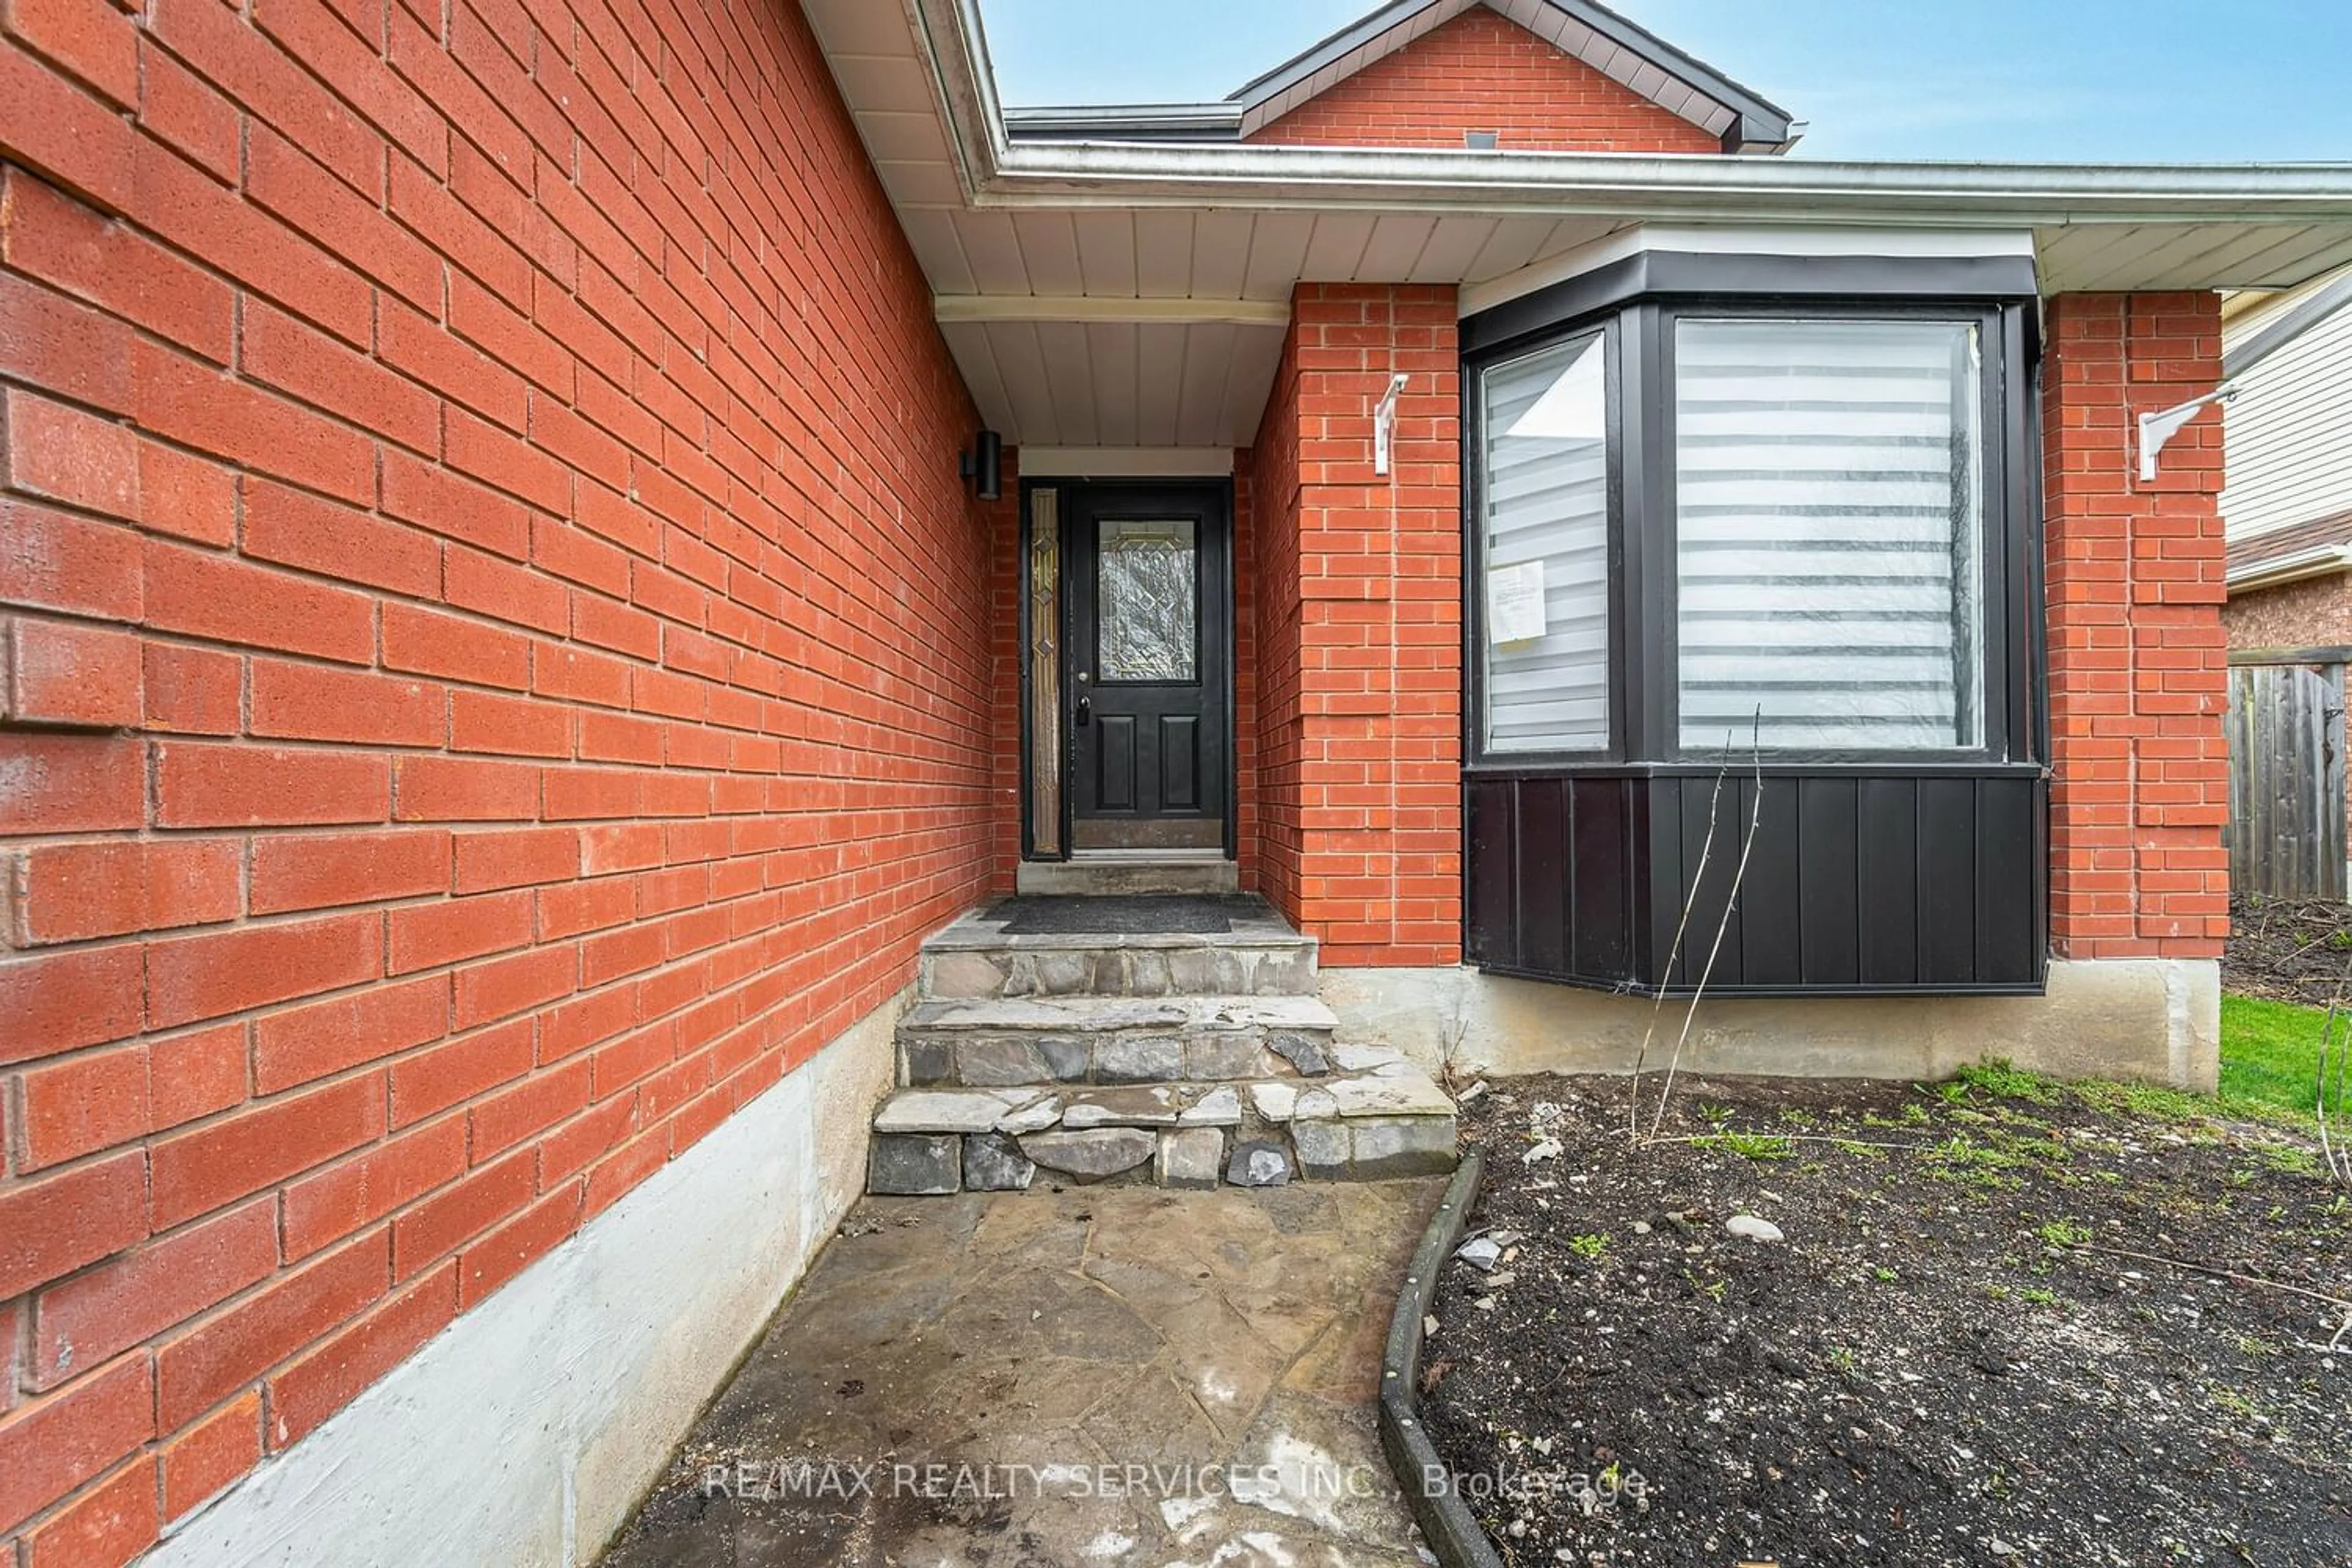 Home with brick exterior material for 209 Walsh Cres, Orangeville Ontario L9W 4T2